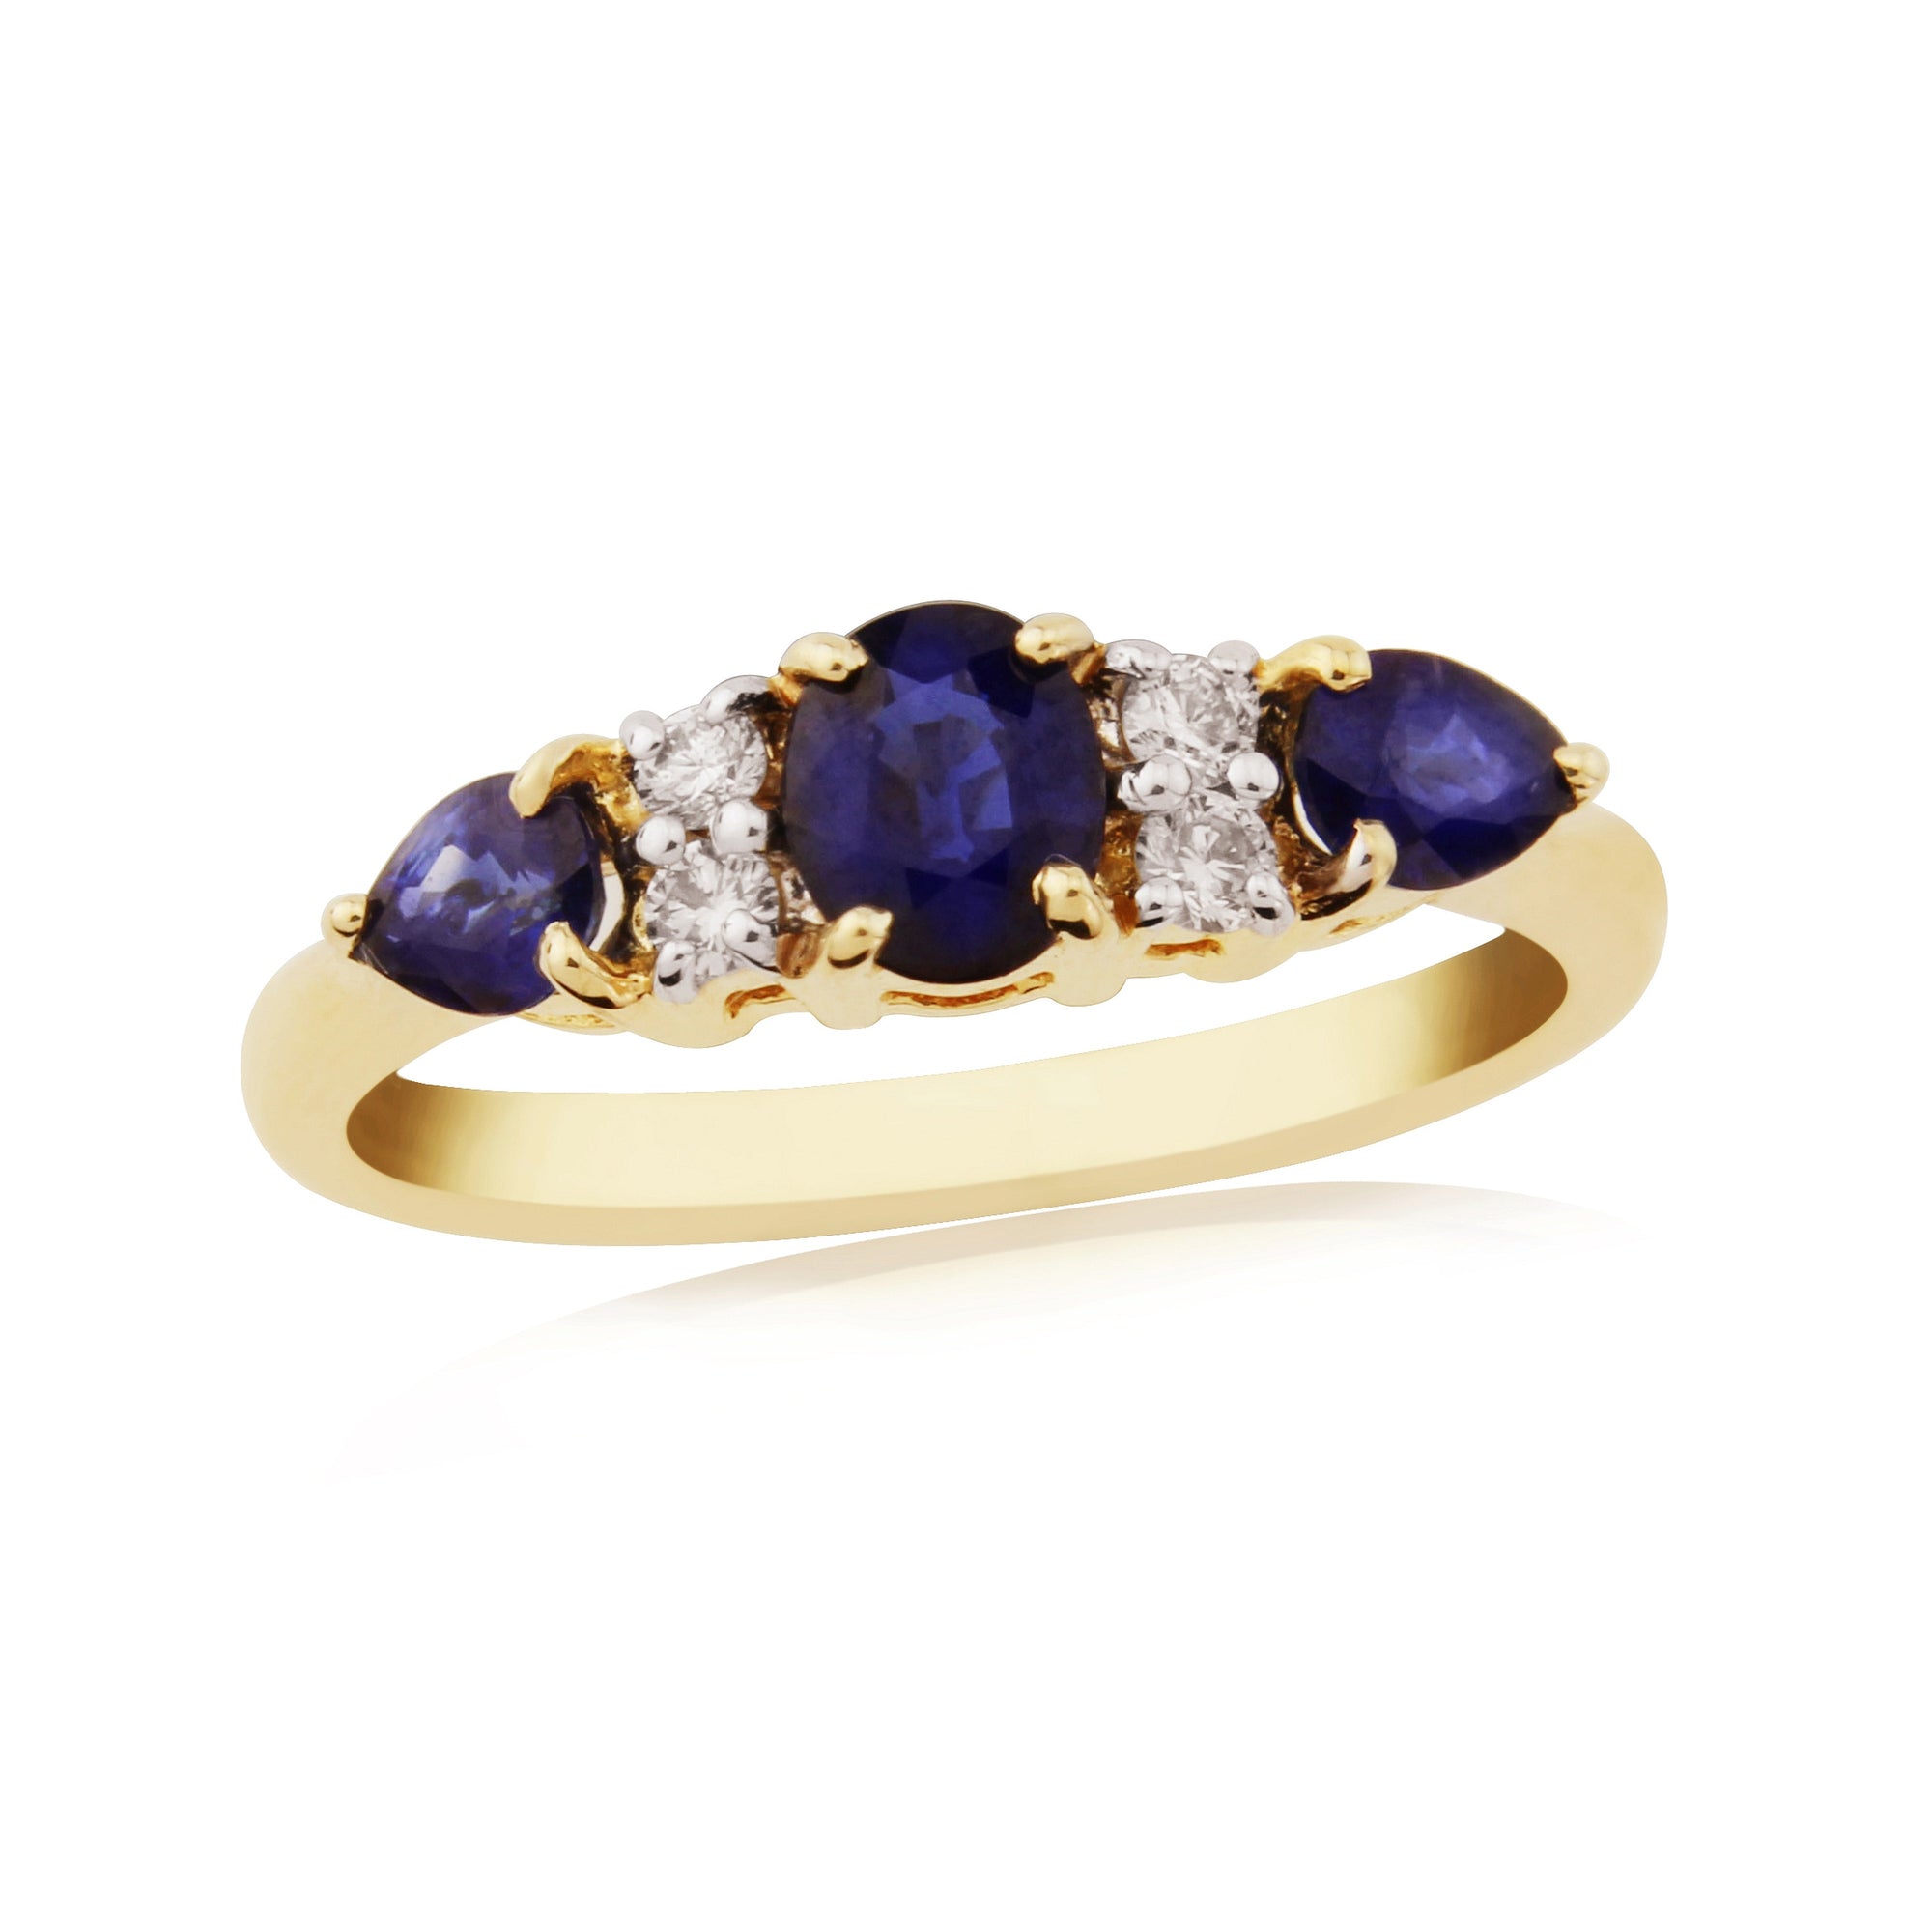 9ct 5x4mm oval sapphire with two 4x3mm pear shape sapphires & diamond ring 0.11ct